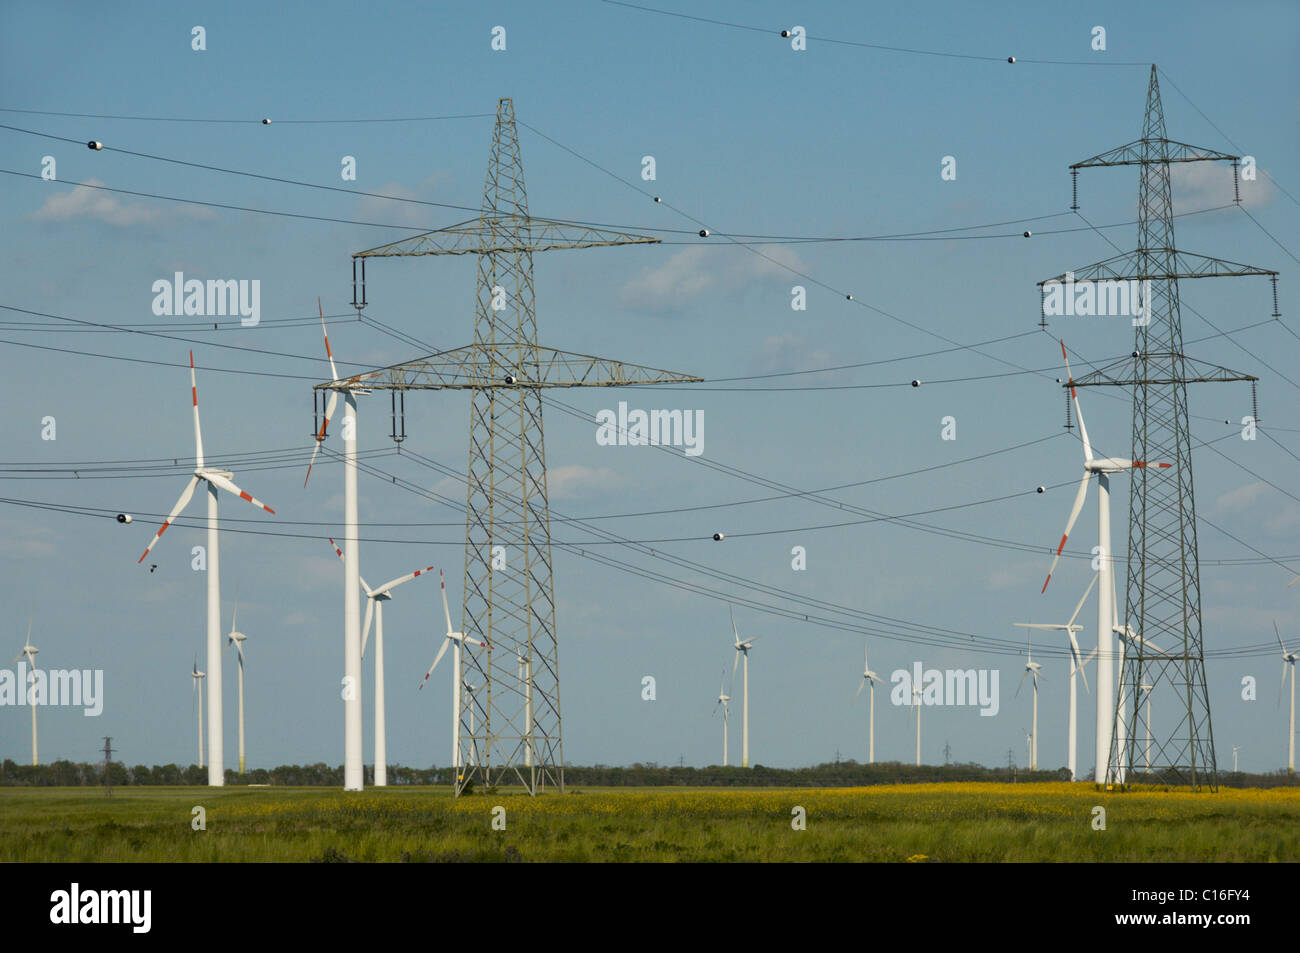 Electricity pylons and wind turbines standing in fields, Burgenland, Austria, Europe Stock Photo